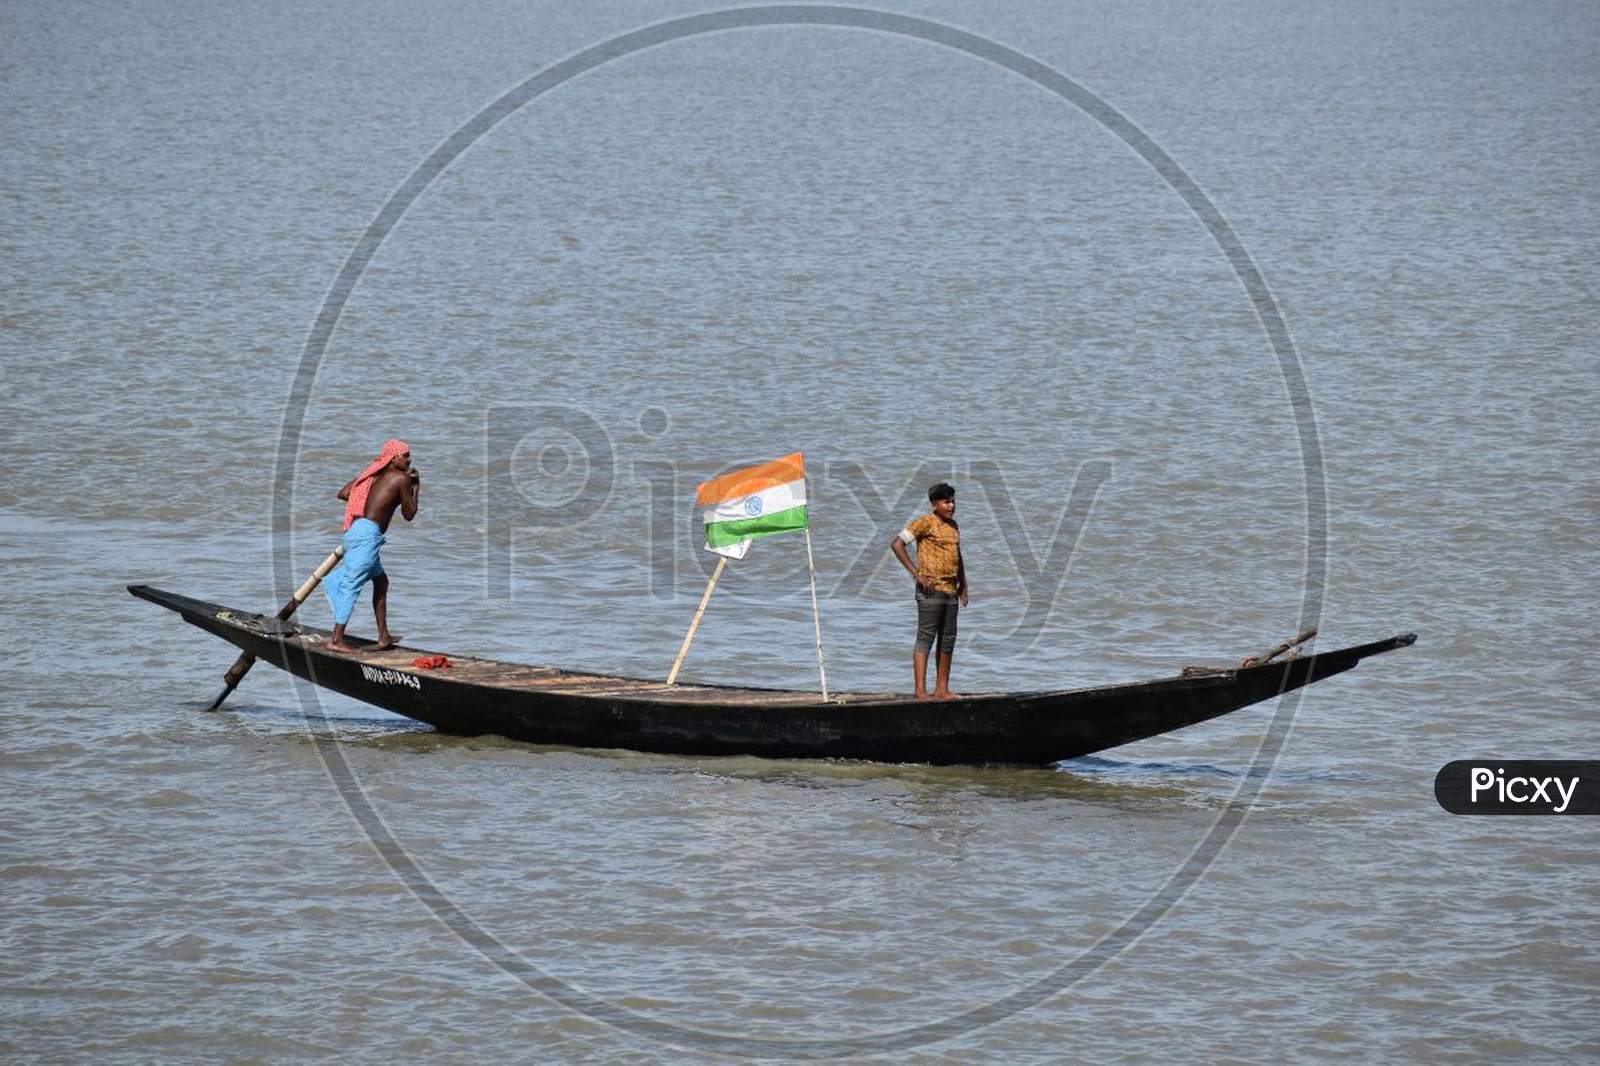 Tow man boating and middle in beautiful Indian flag